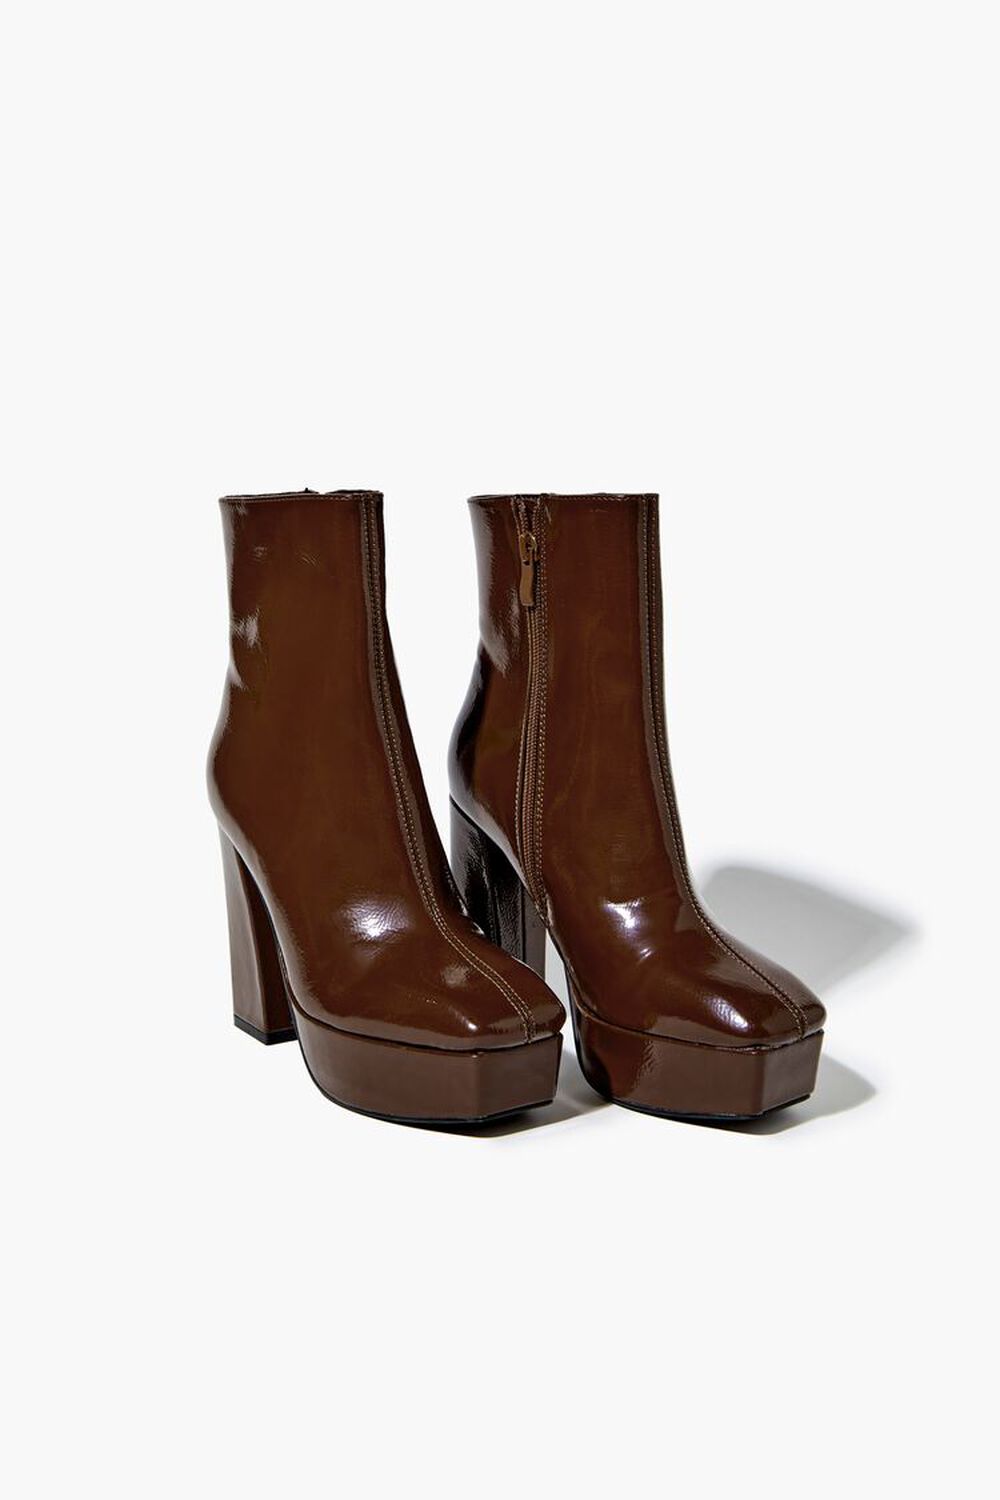 BROWN Pebbled Faux Leather Booties, image 1